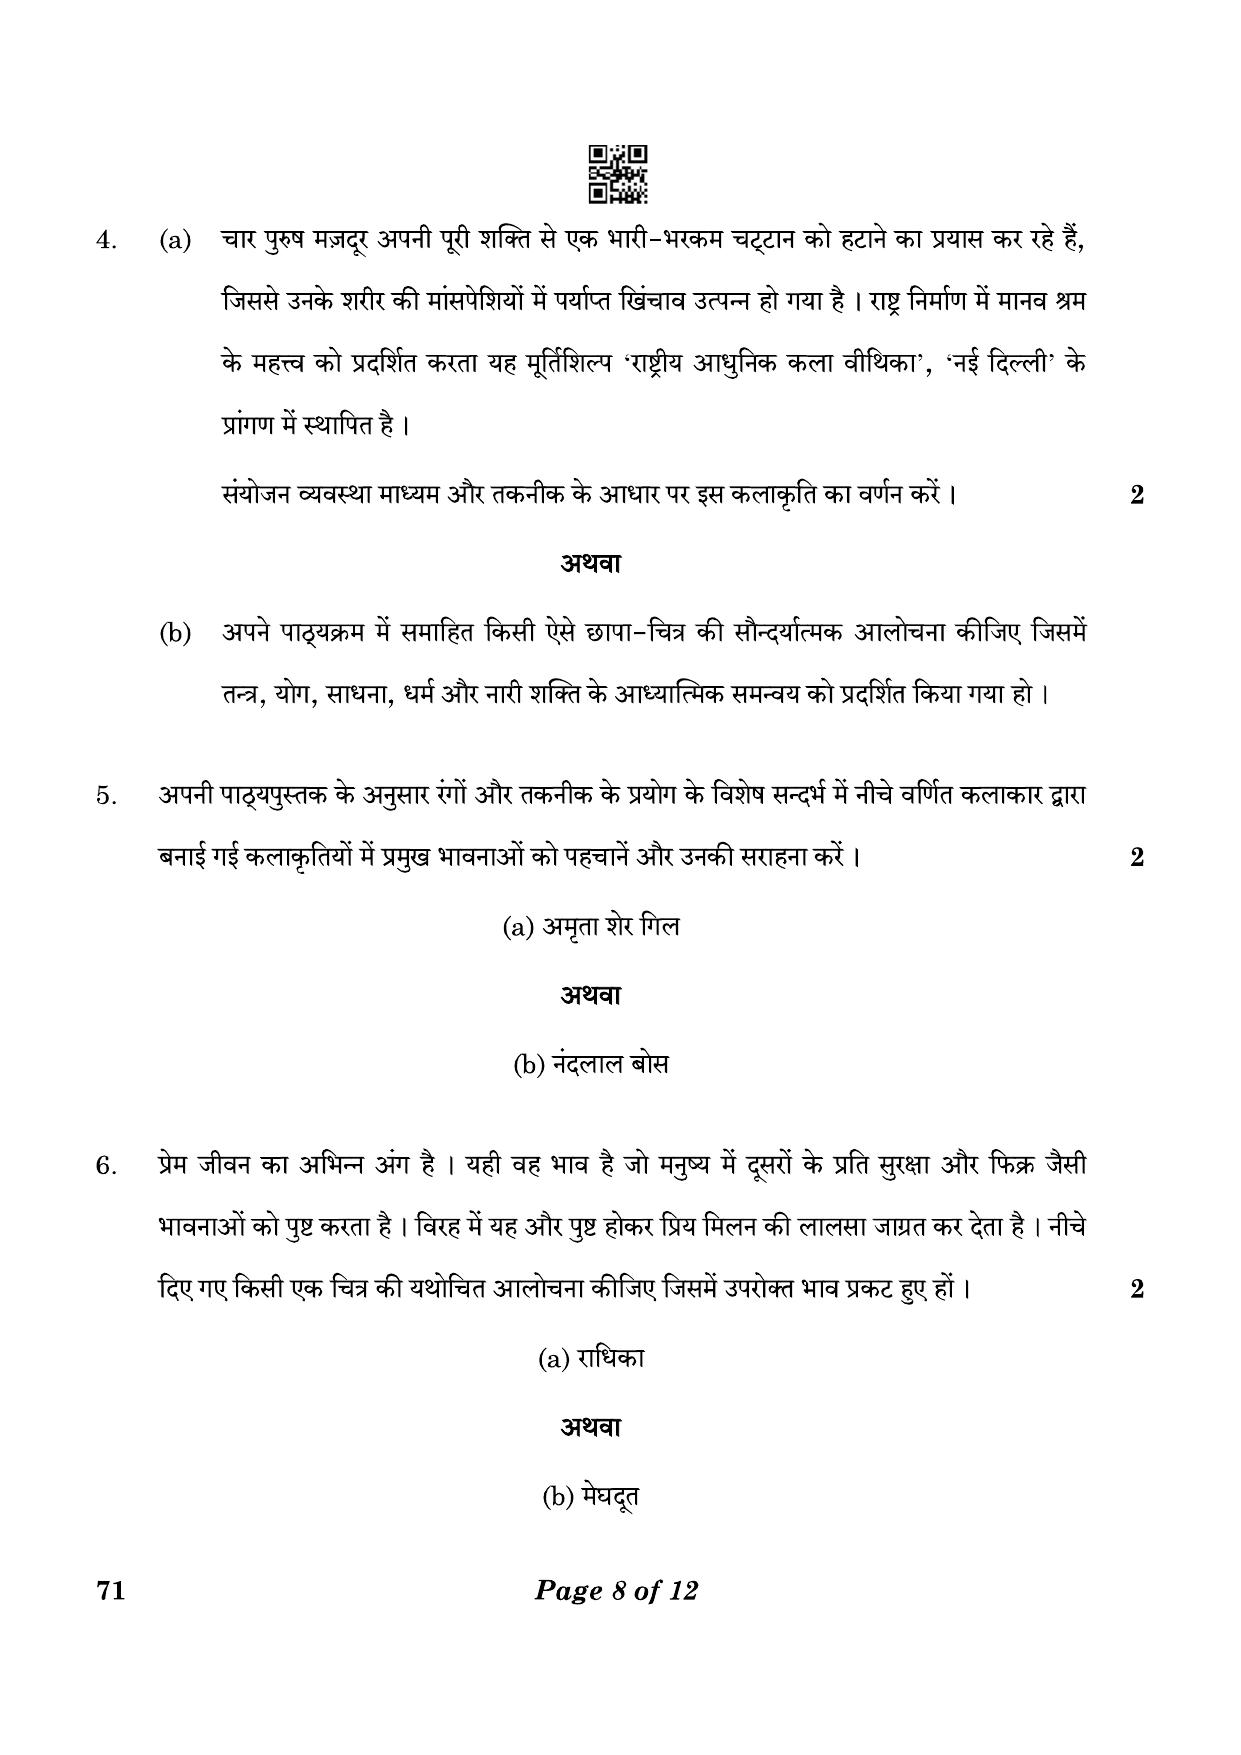 CBSE Class 12 71_Painting 2023 Question Paper - Page 8